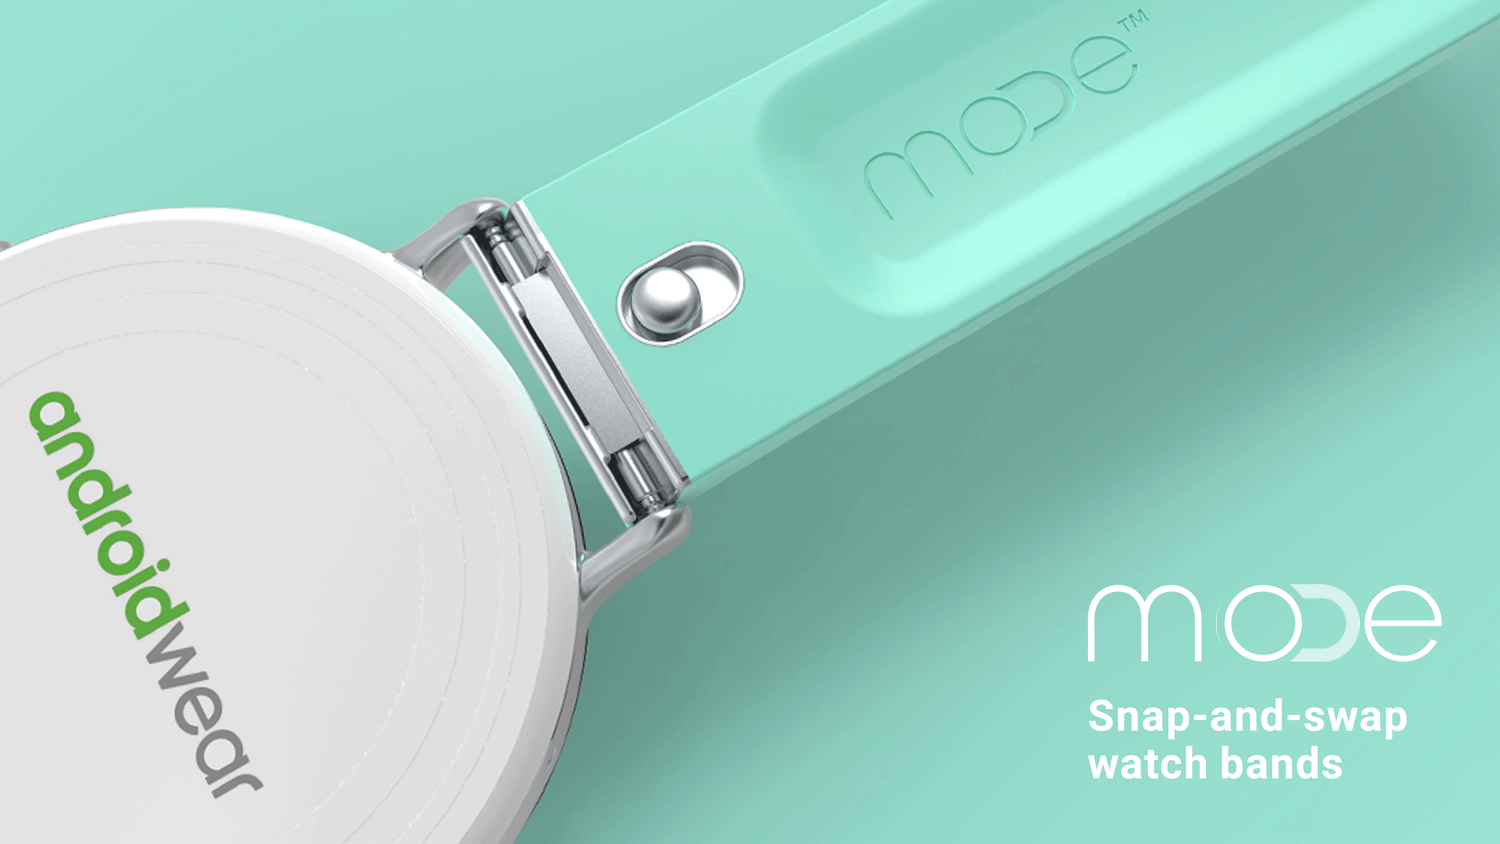 How Google Mode's snap and swap watchbands work